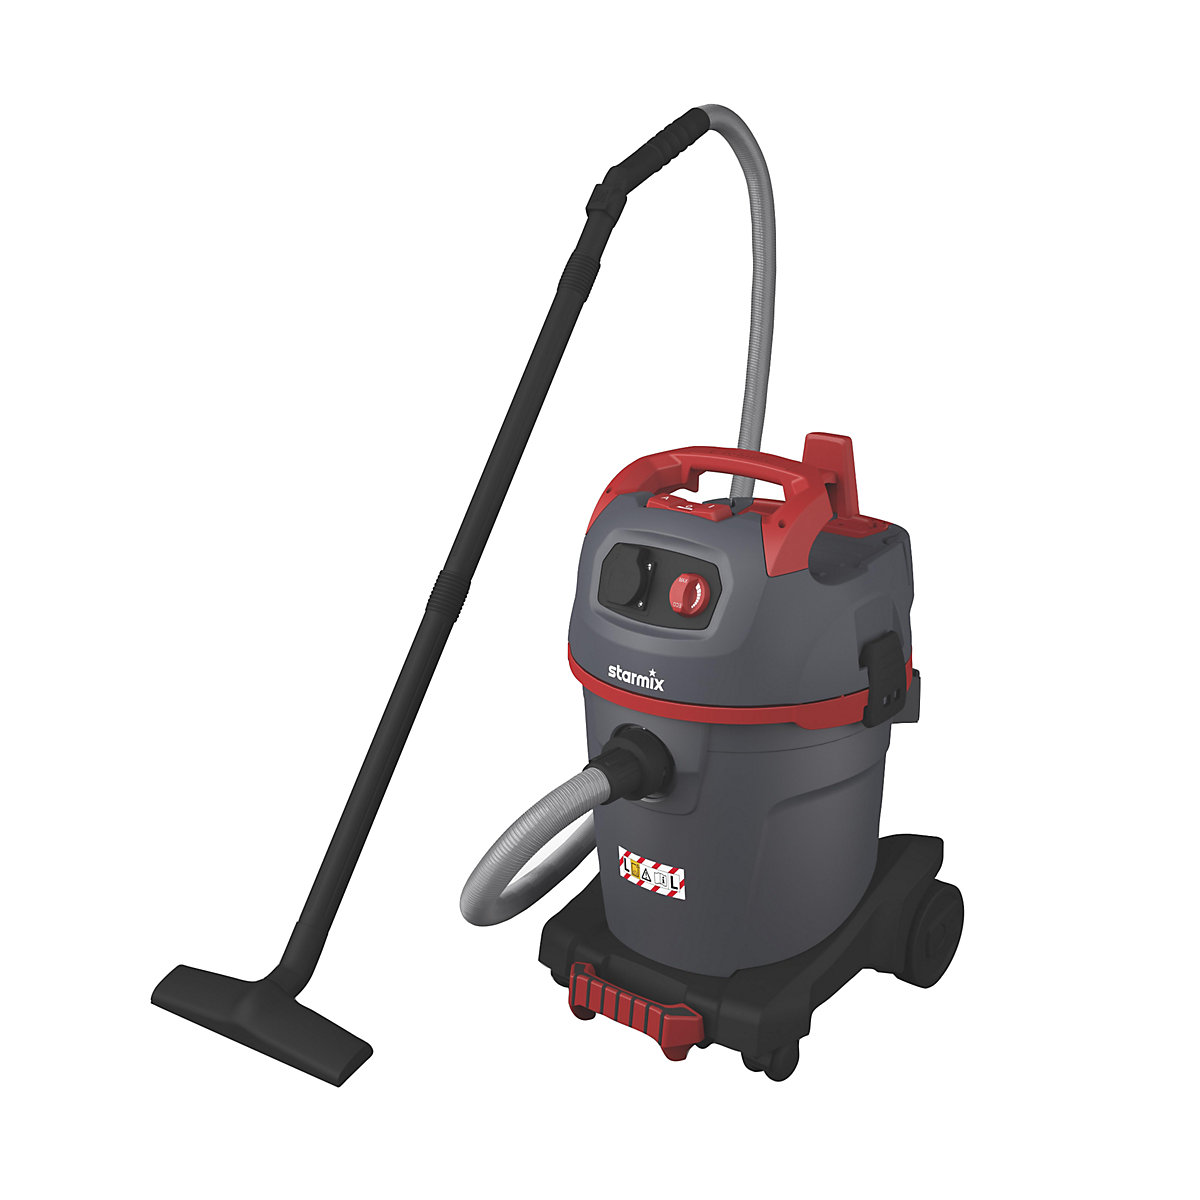 Wet and dry vacuum cleaner - starmix